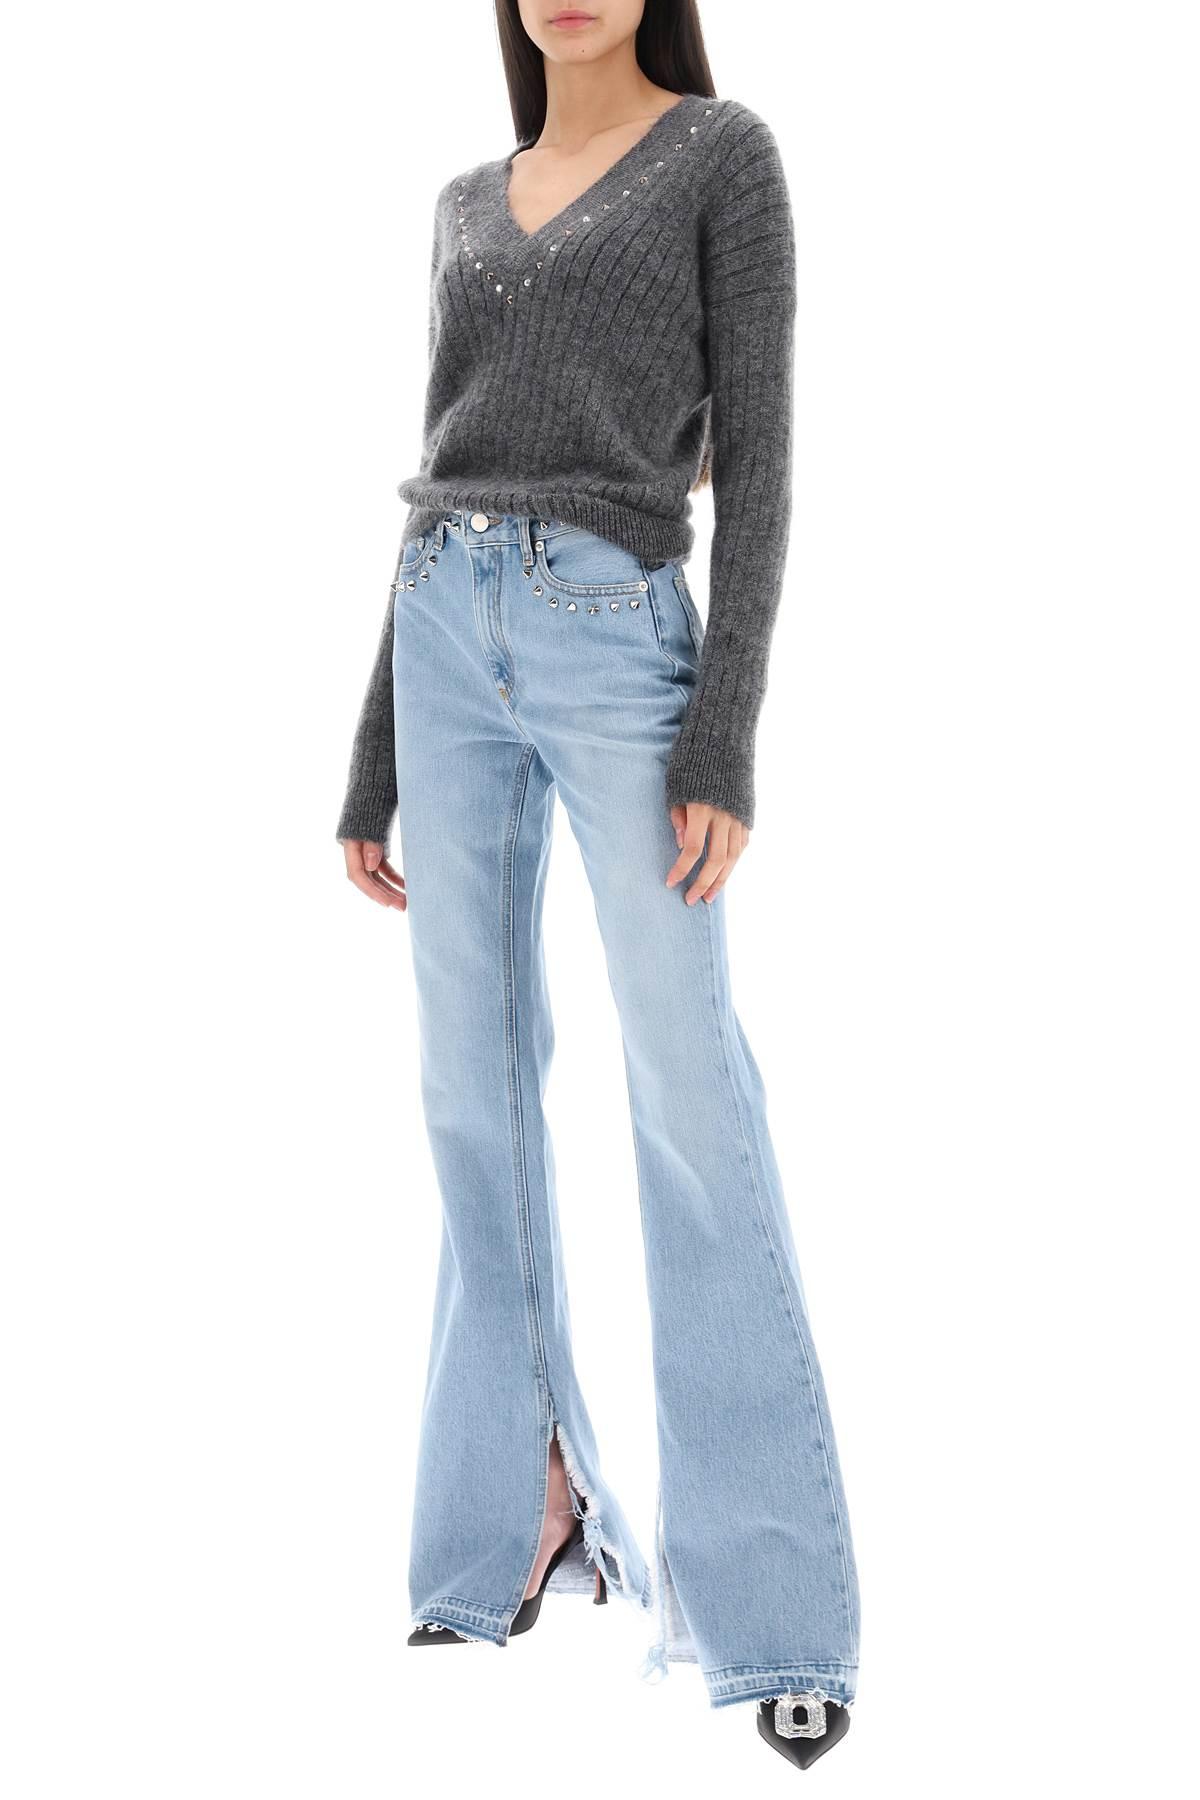 High-rise flared jeans in blue - Alessandra Rich